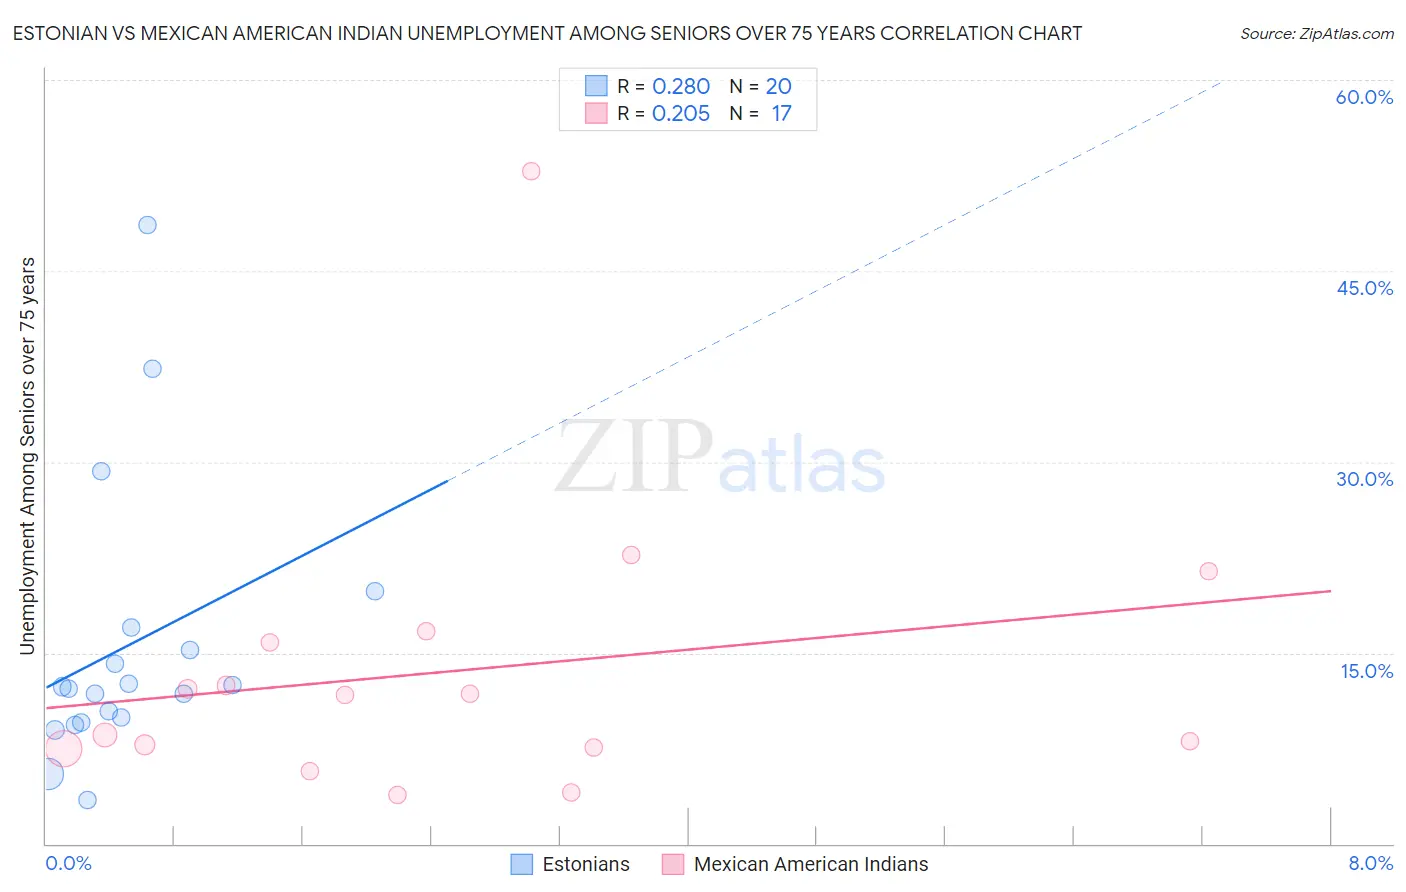 Estonian vs Mexican American Indian Unemployment Among Seniors over 75 years